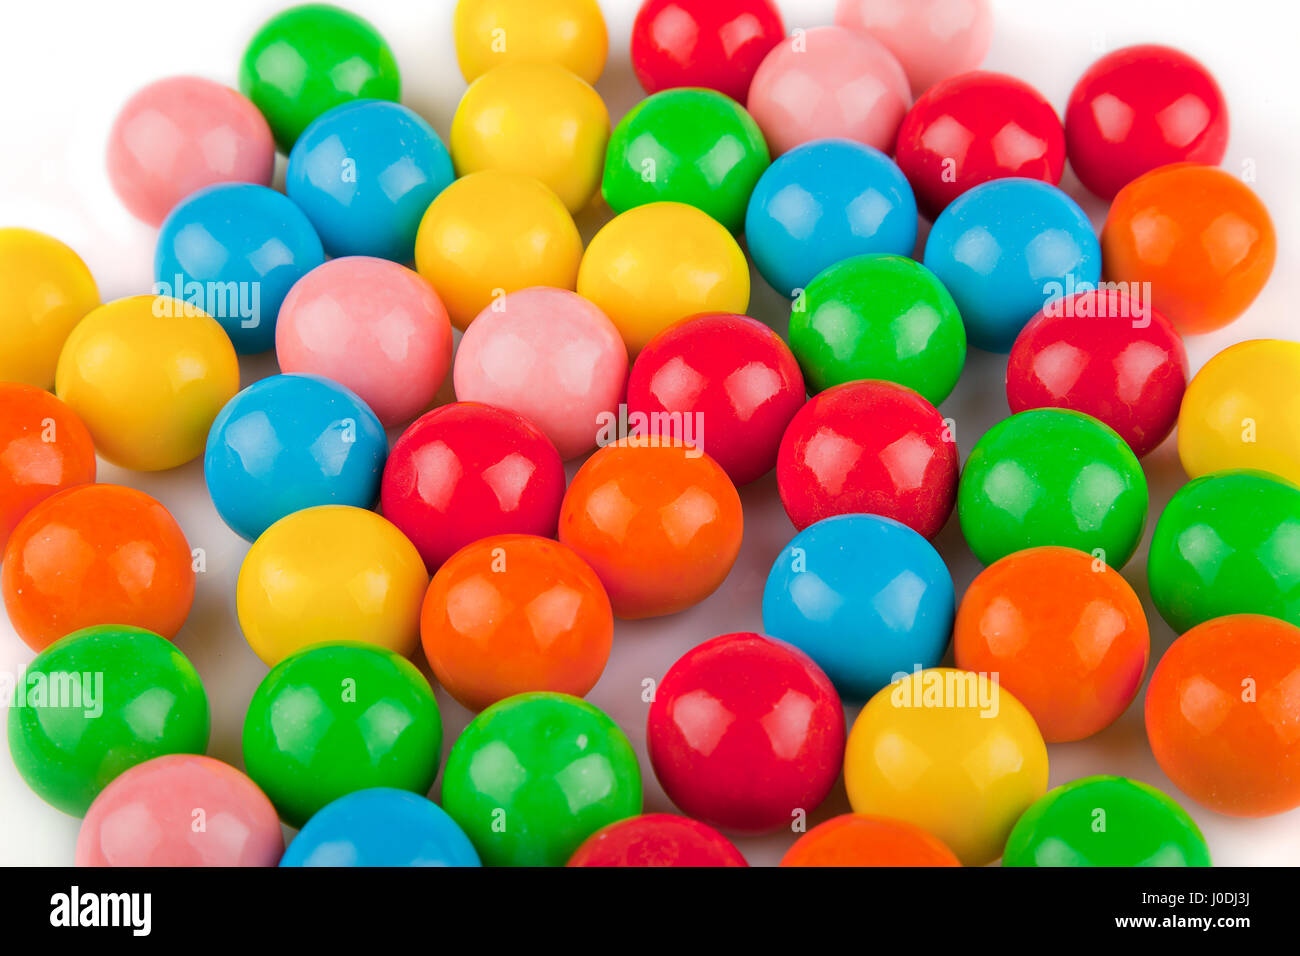 Multicolored gumballs on a white surface. Bubble gums isolated on white background. Stock Photo